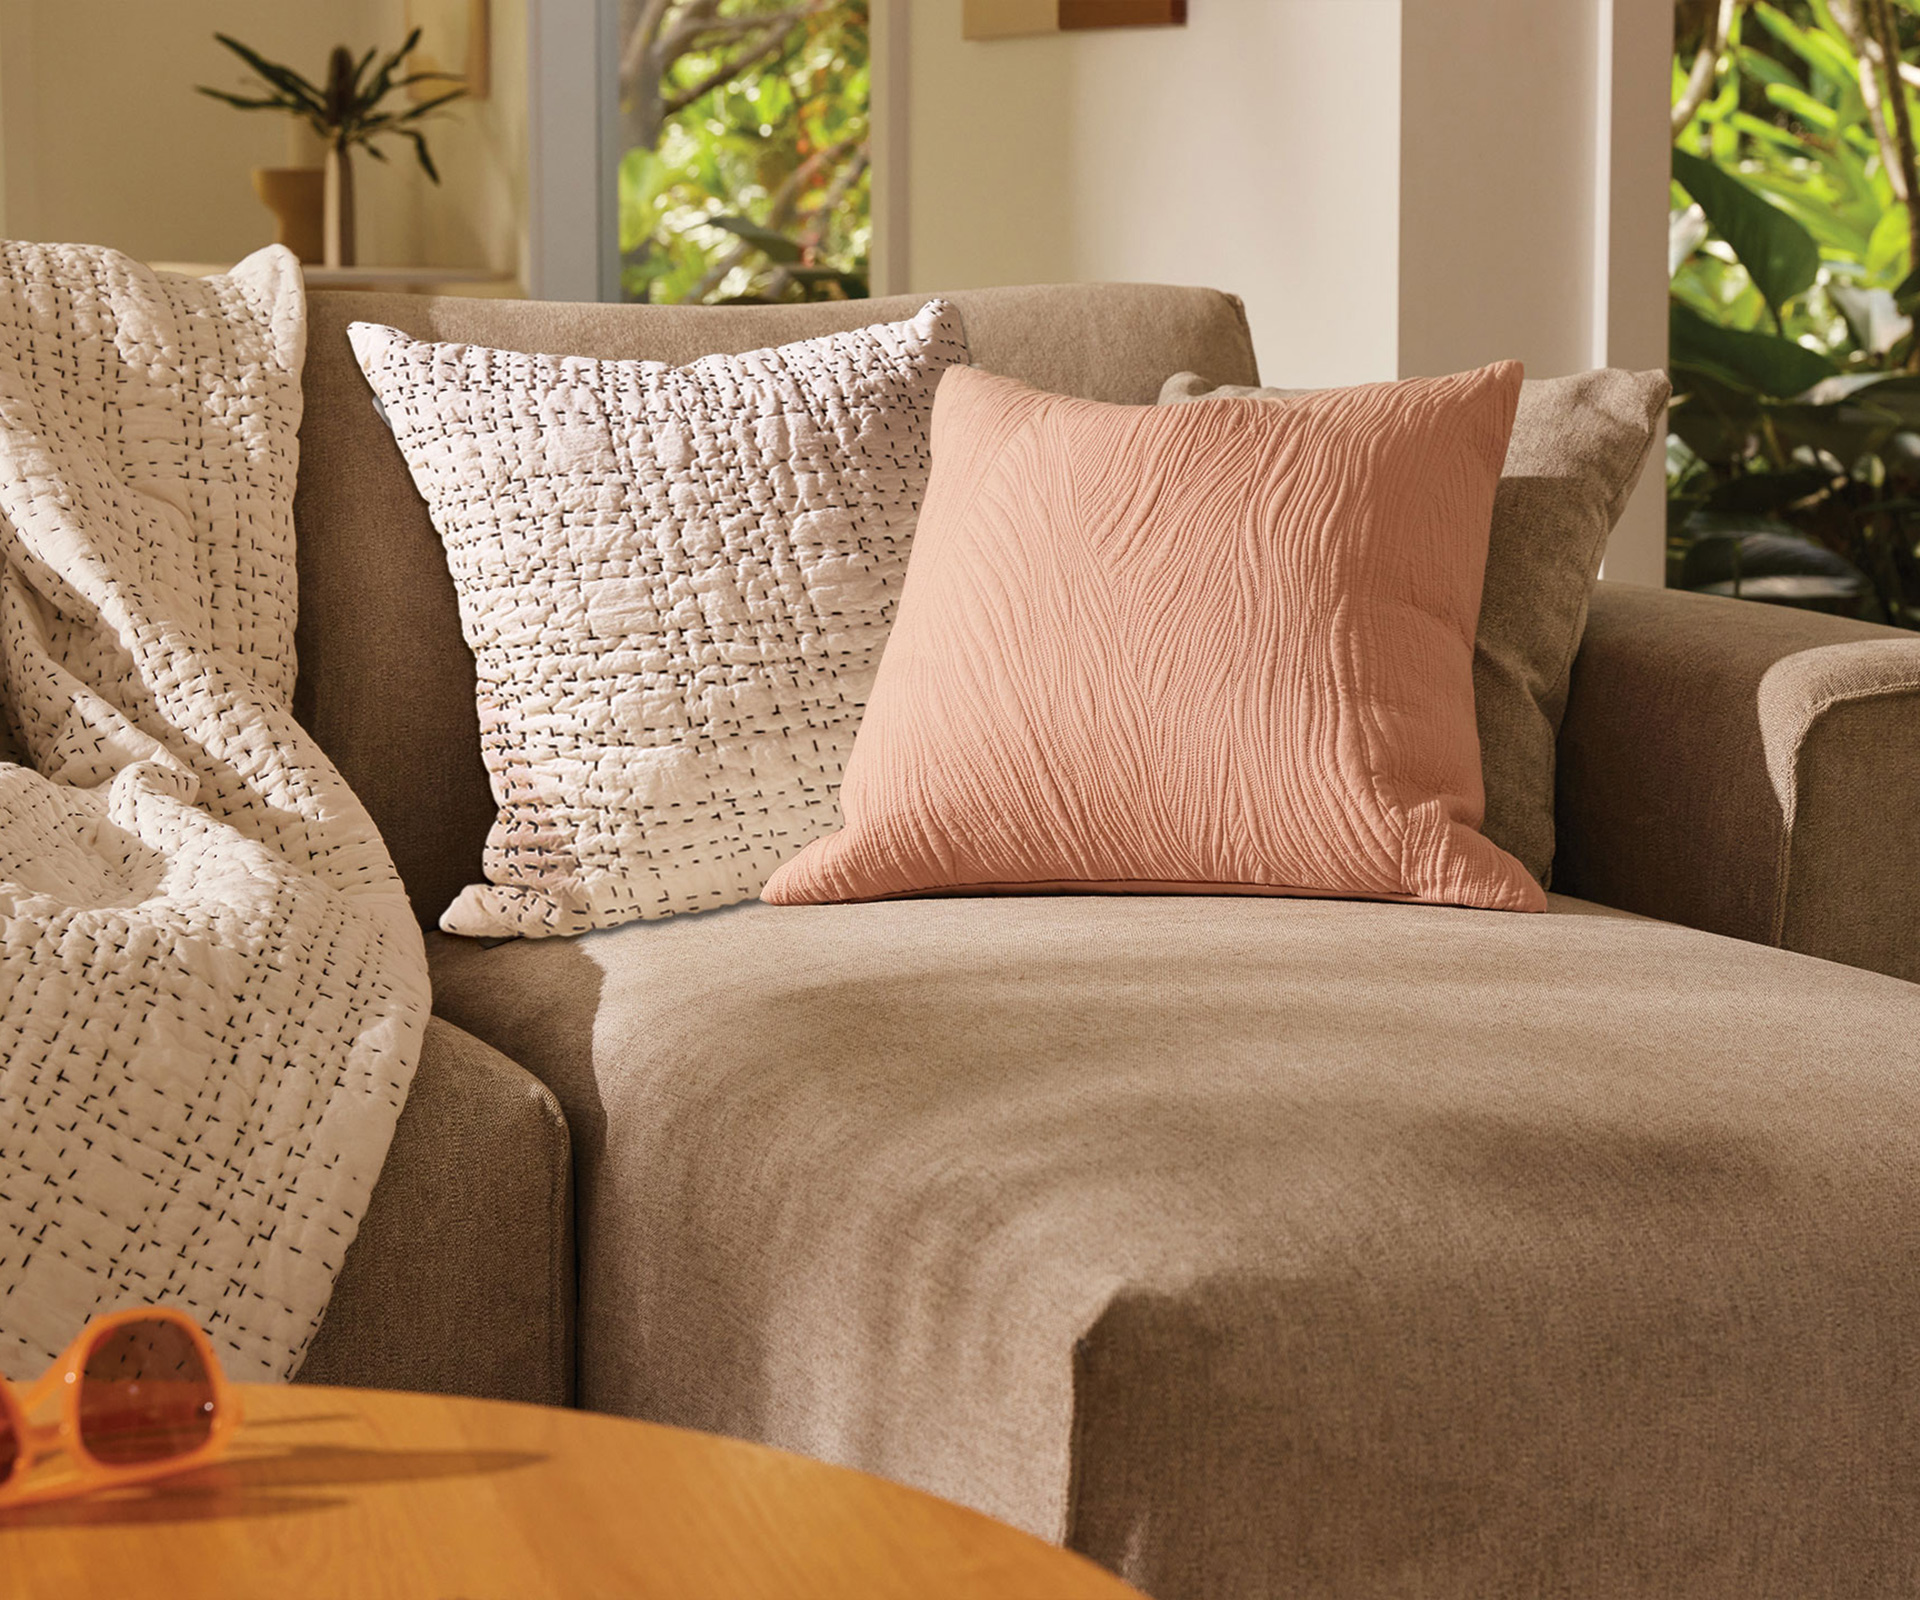 Styling couch cushions is easy with this collection of cushions from the Koala range, which are sitting on a sofa with a Koala throw